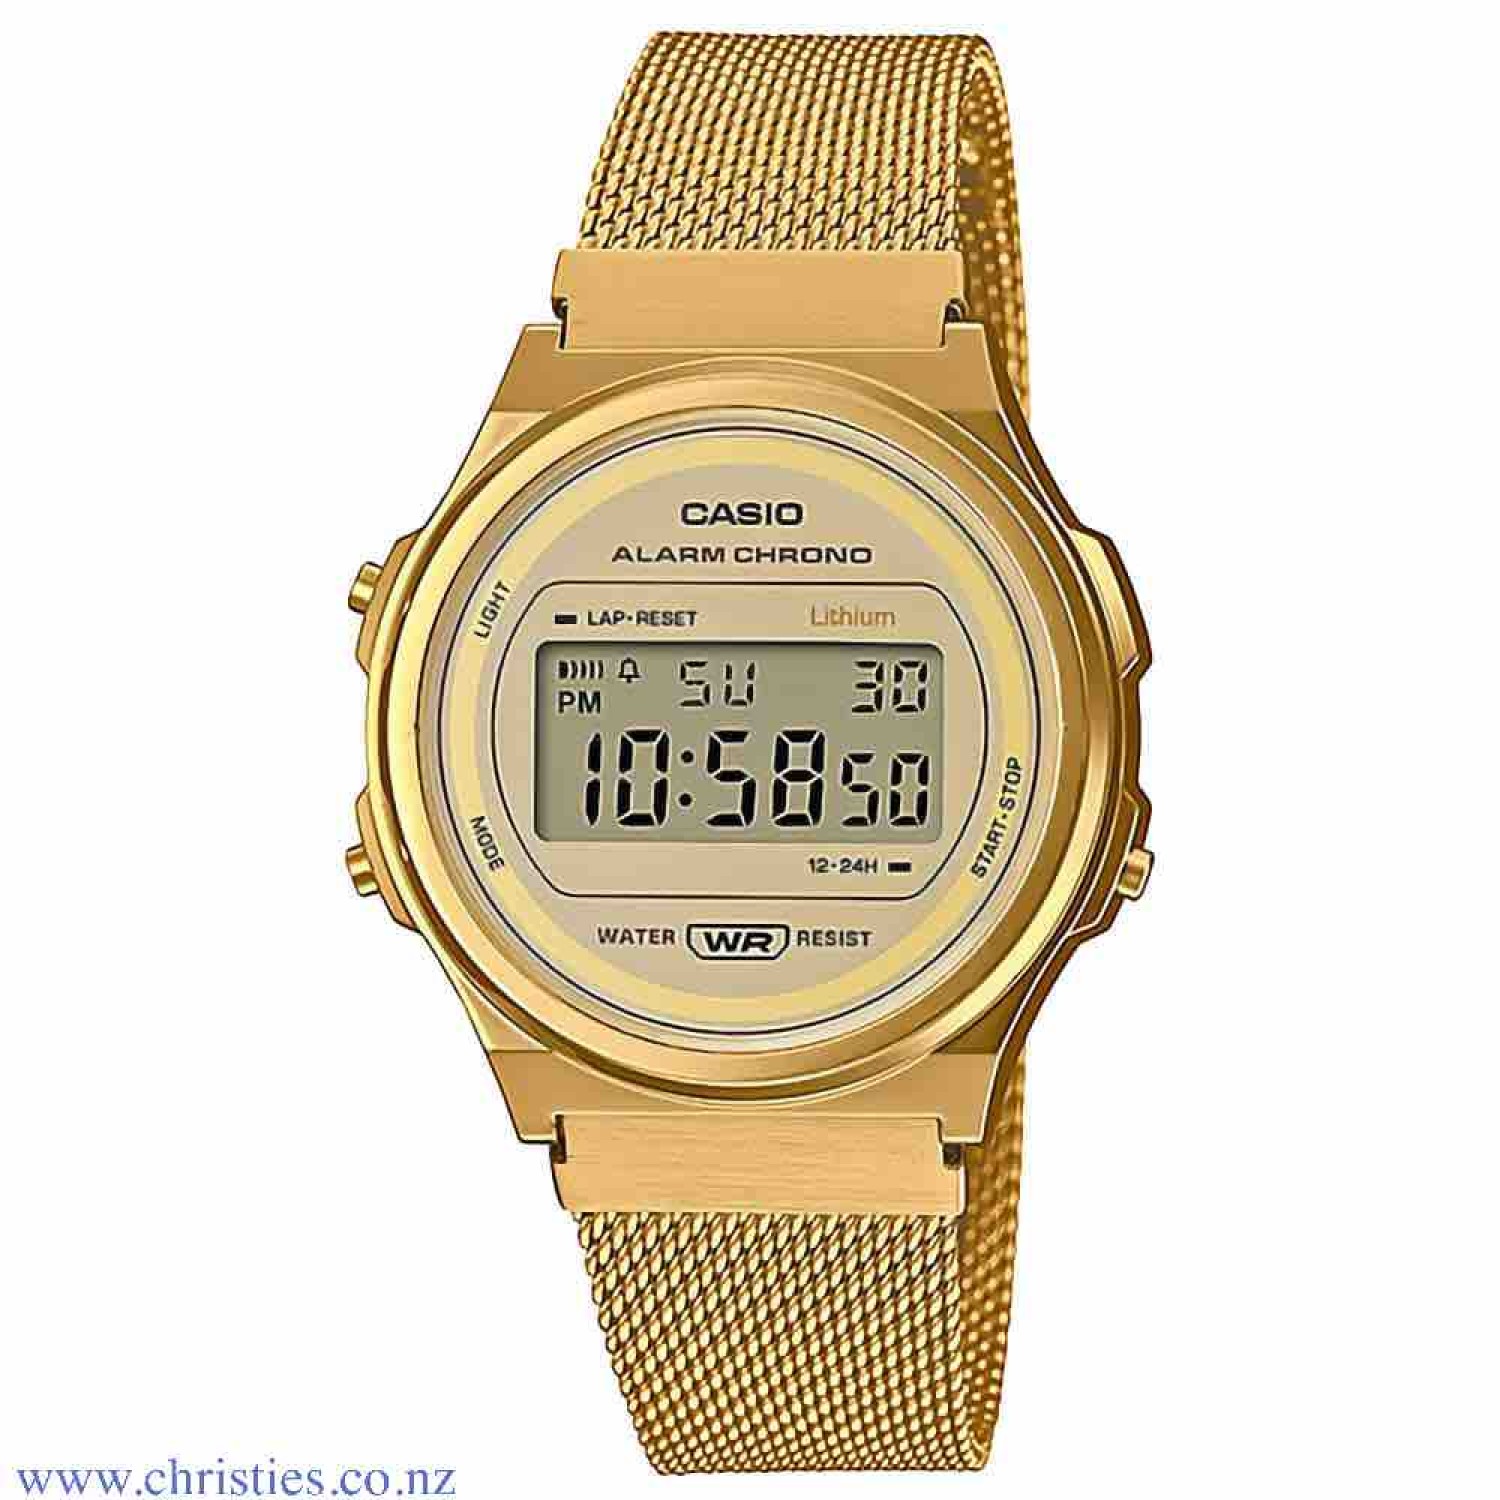 A171WEMG-9A Casio Vintage Alarm Chronograph Watch. Introducing the A171 Series of round-face, unisex timepieces. Uncluttered monotone coloring combines with middle-sized unisex designs that go great with a wide variety of styles. The bands feature a slide